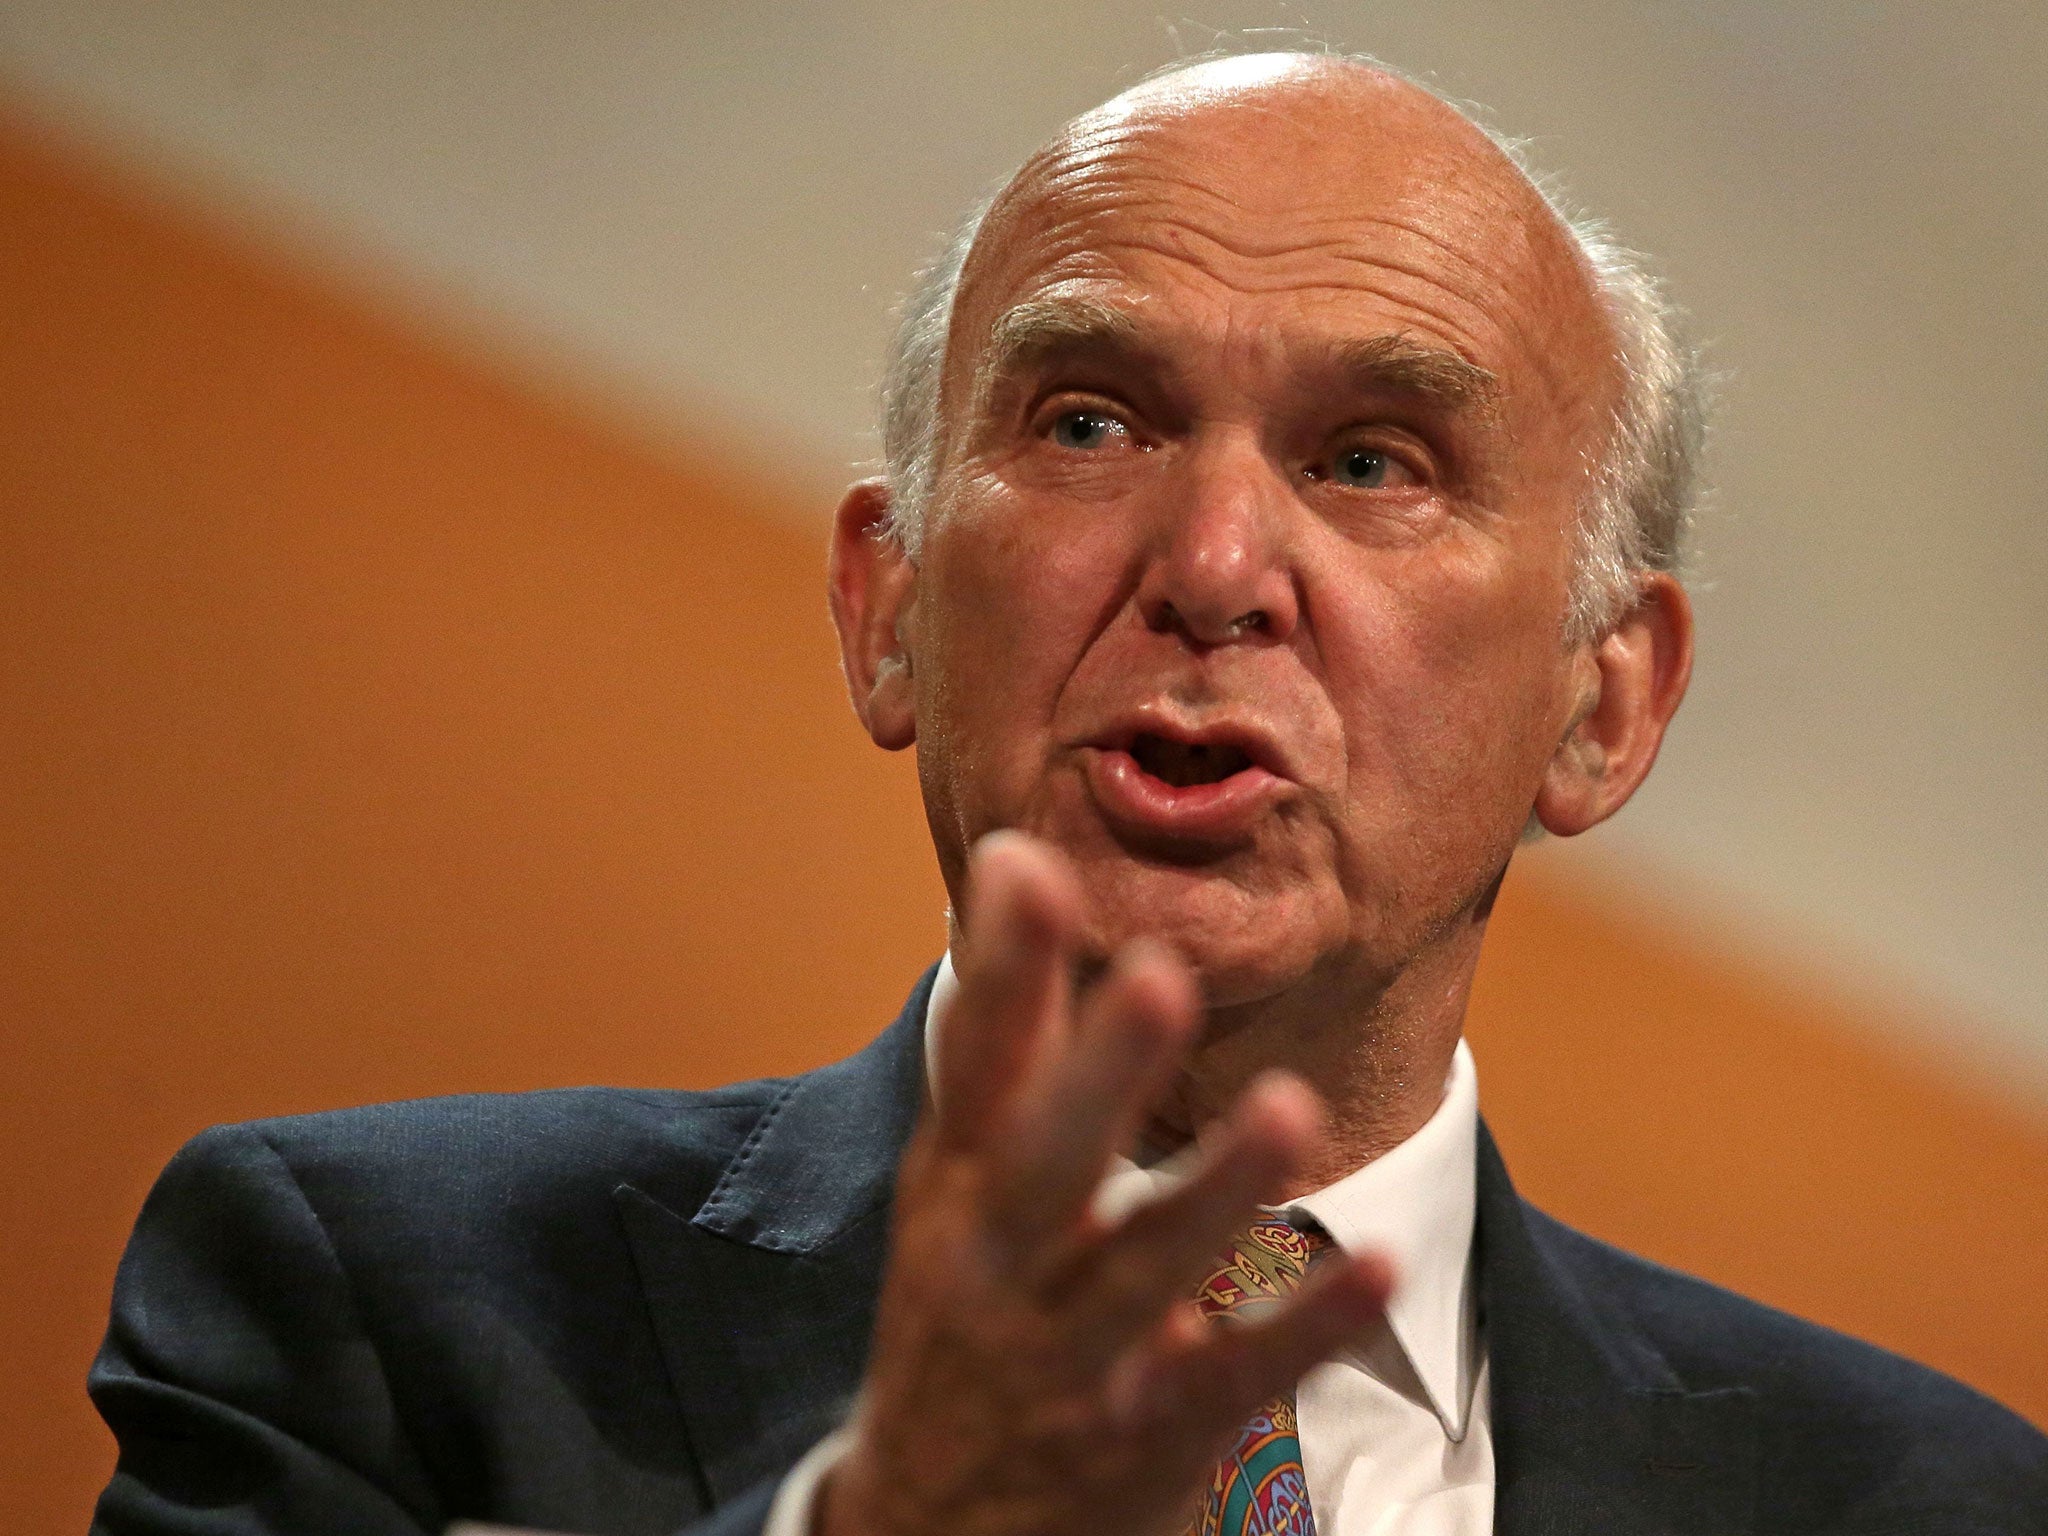 Vince Cable said the row with Donald Trump meant Theresa May had lost 'her last remaining friend on the world stage'